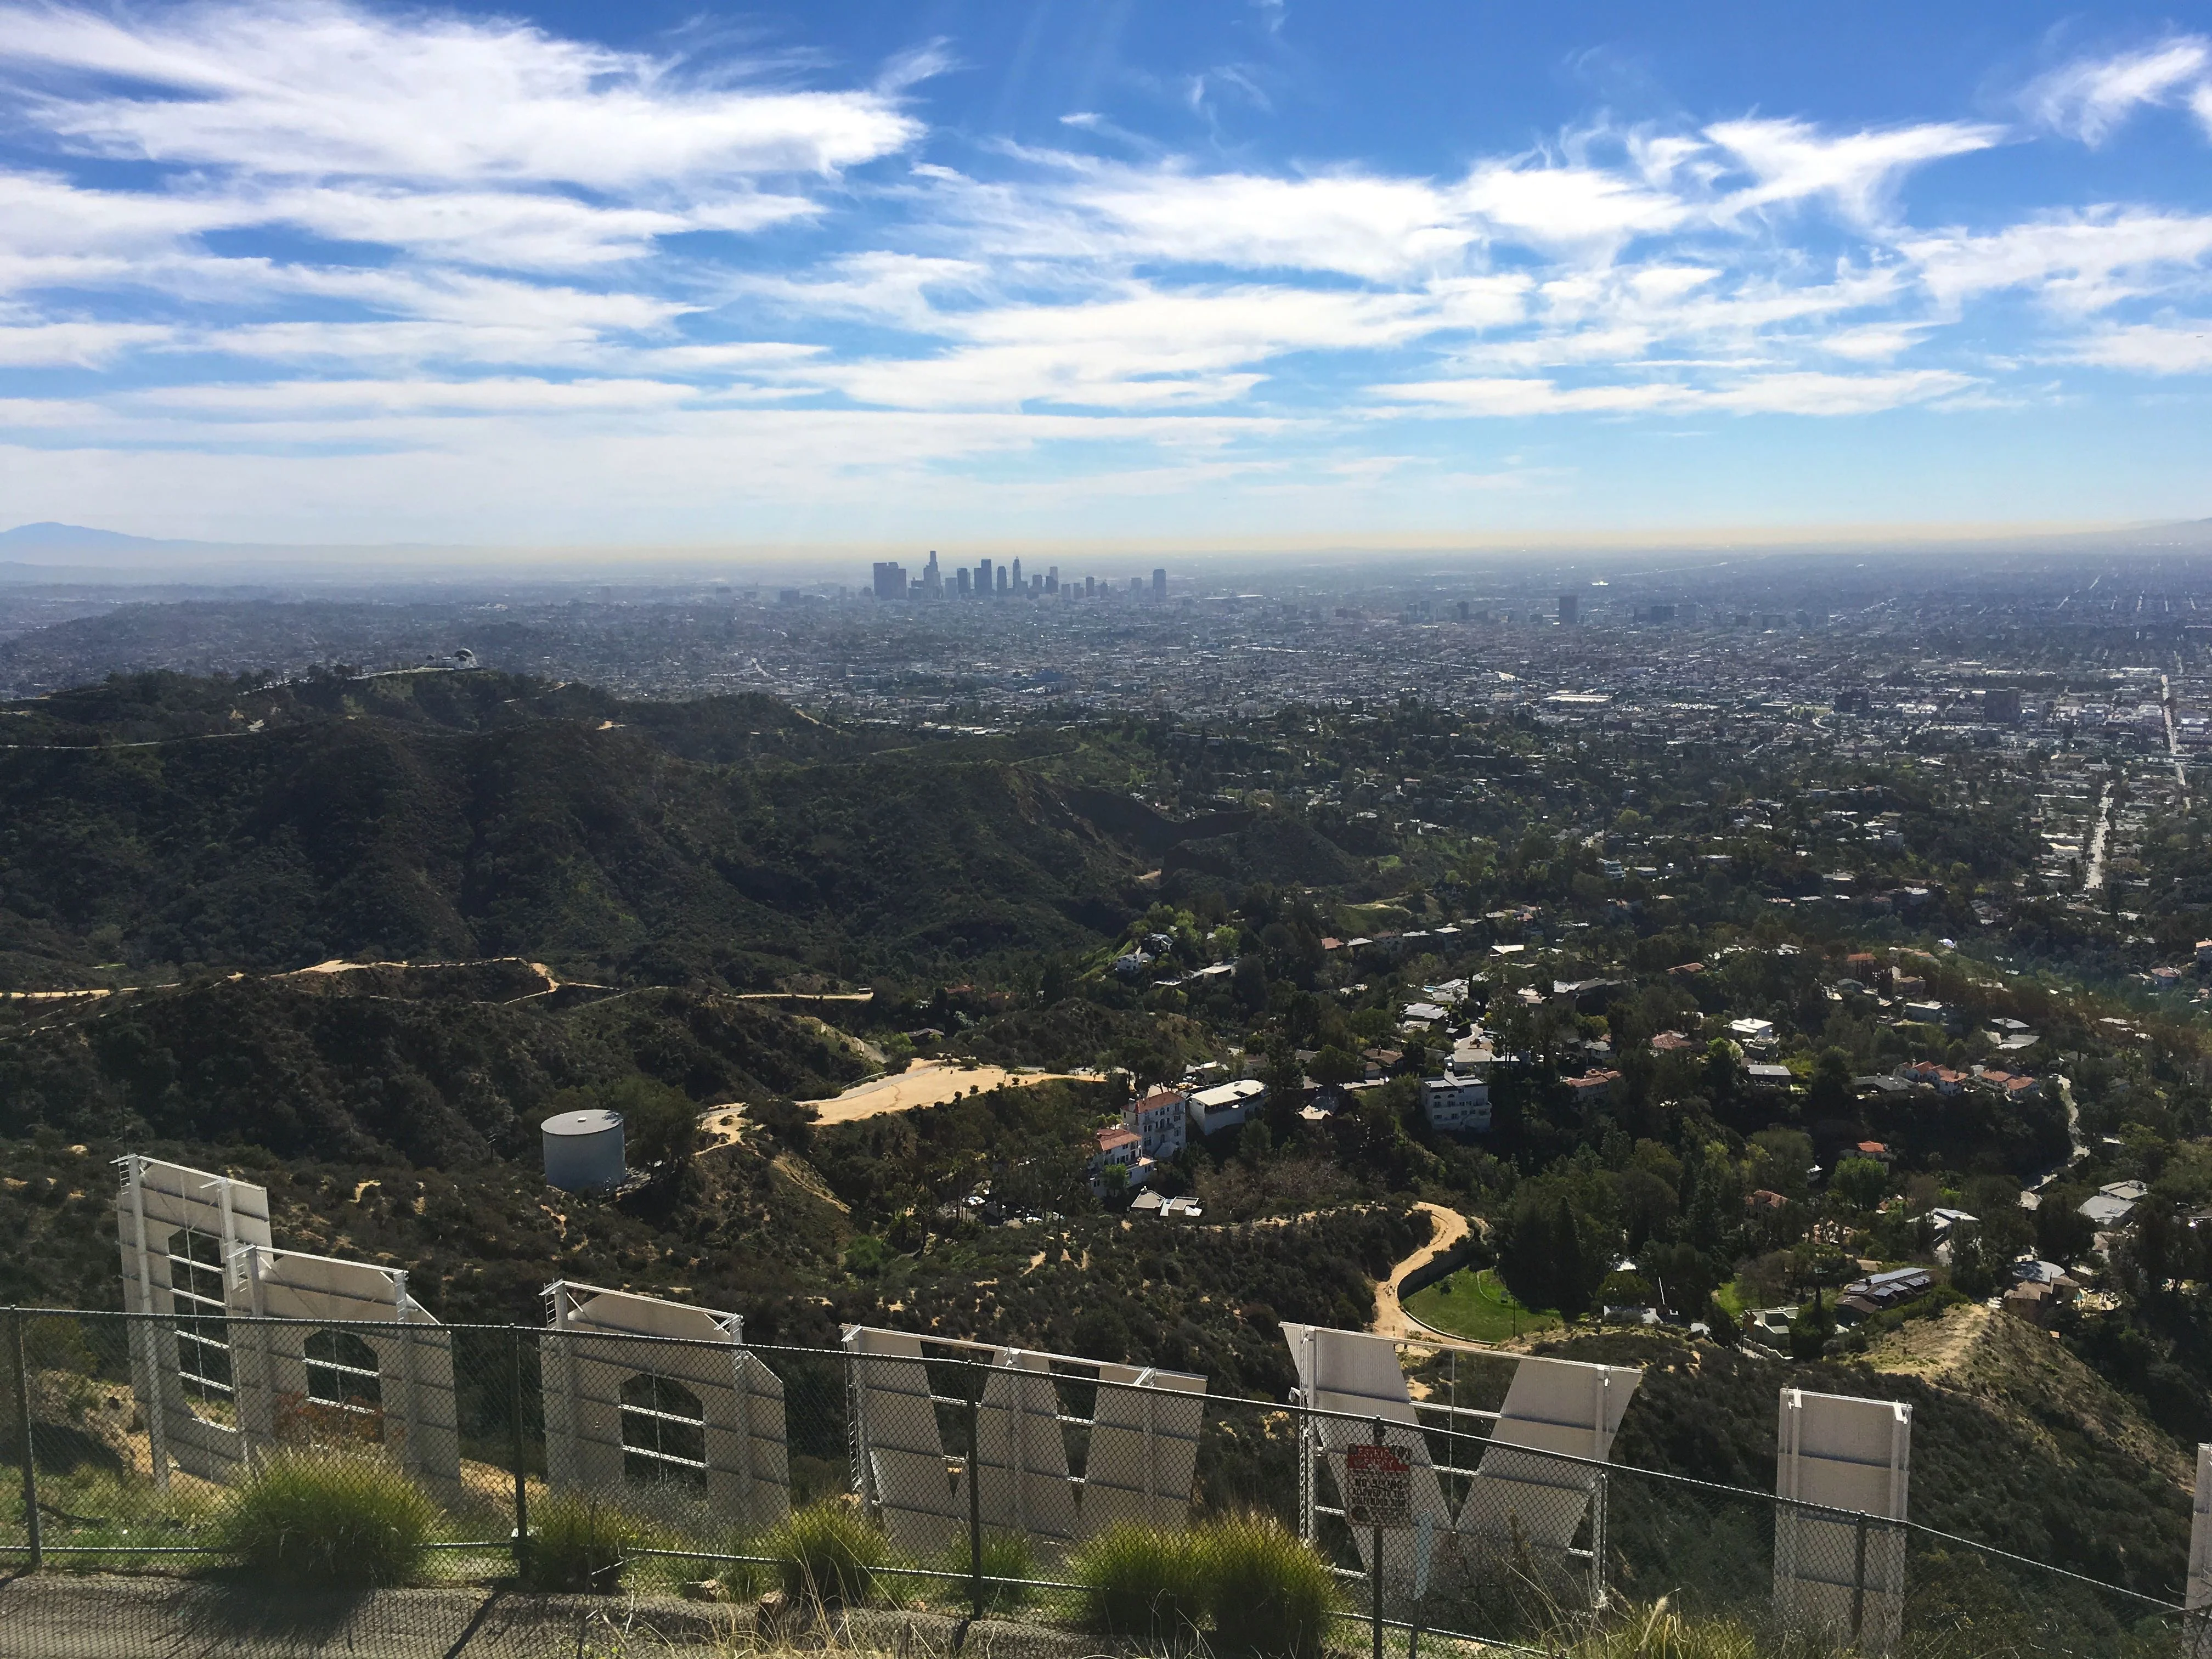 Hiking to the Hollywood sign is just one of the fun things for Active Families to do in Los Angeles